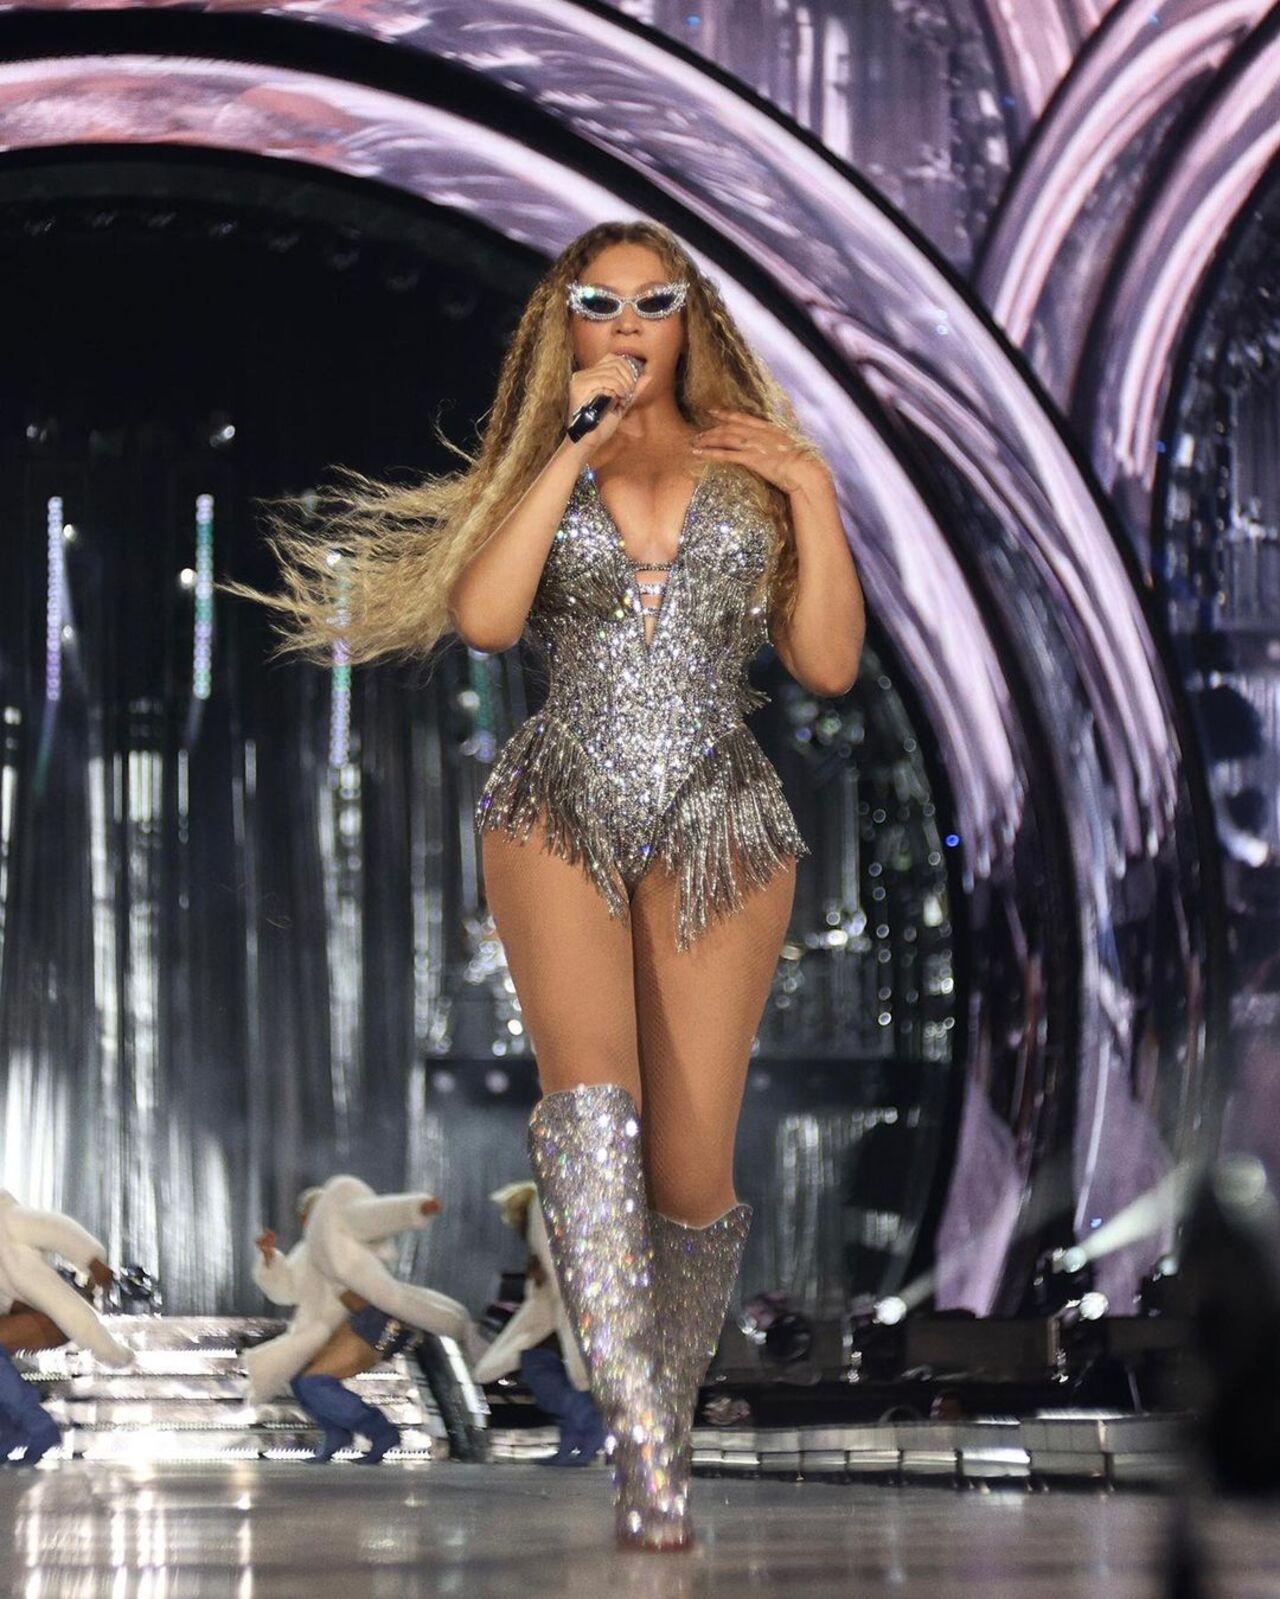 During her debut performance, Beyonce wore a custom Gucci bodysuit adorned with silver sequins and crystals, paired with matching over-the-knee boots